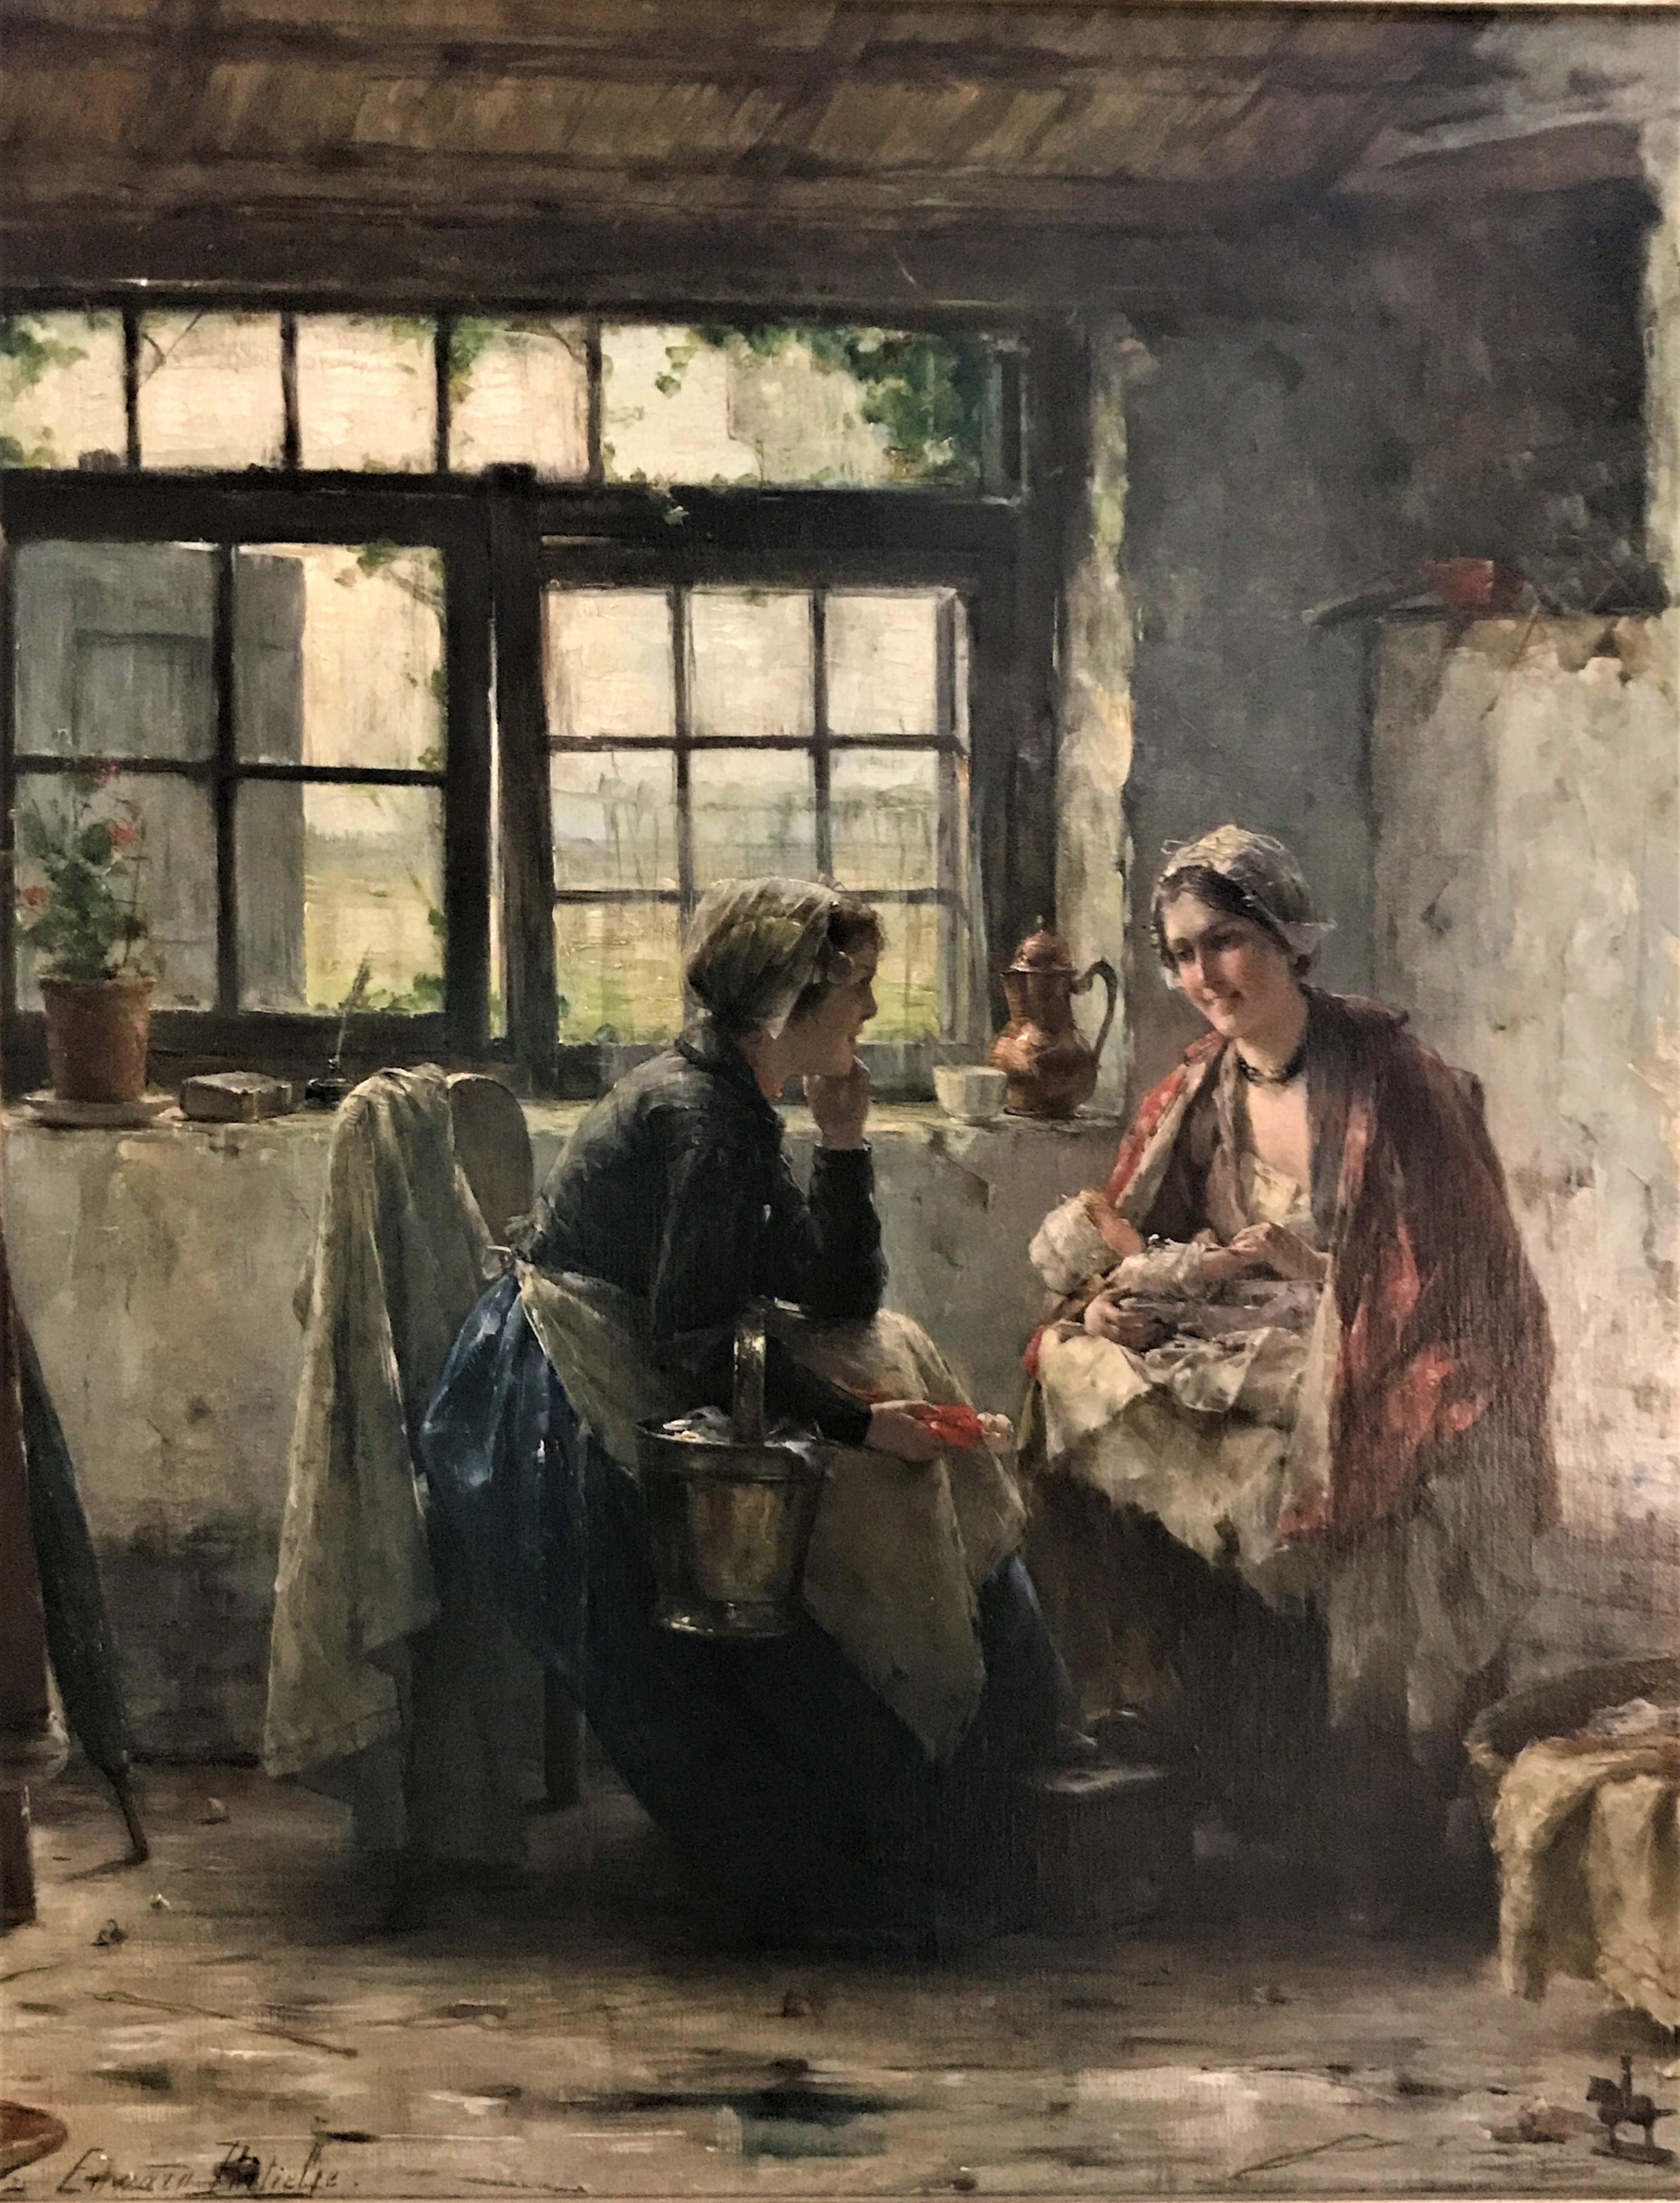 Edward Antoon Portielje Figurative Painting - Two young women conversing in the kitchen, original oil on canvas, circa 1920